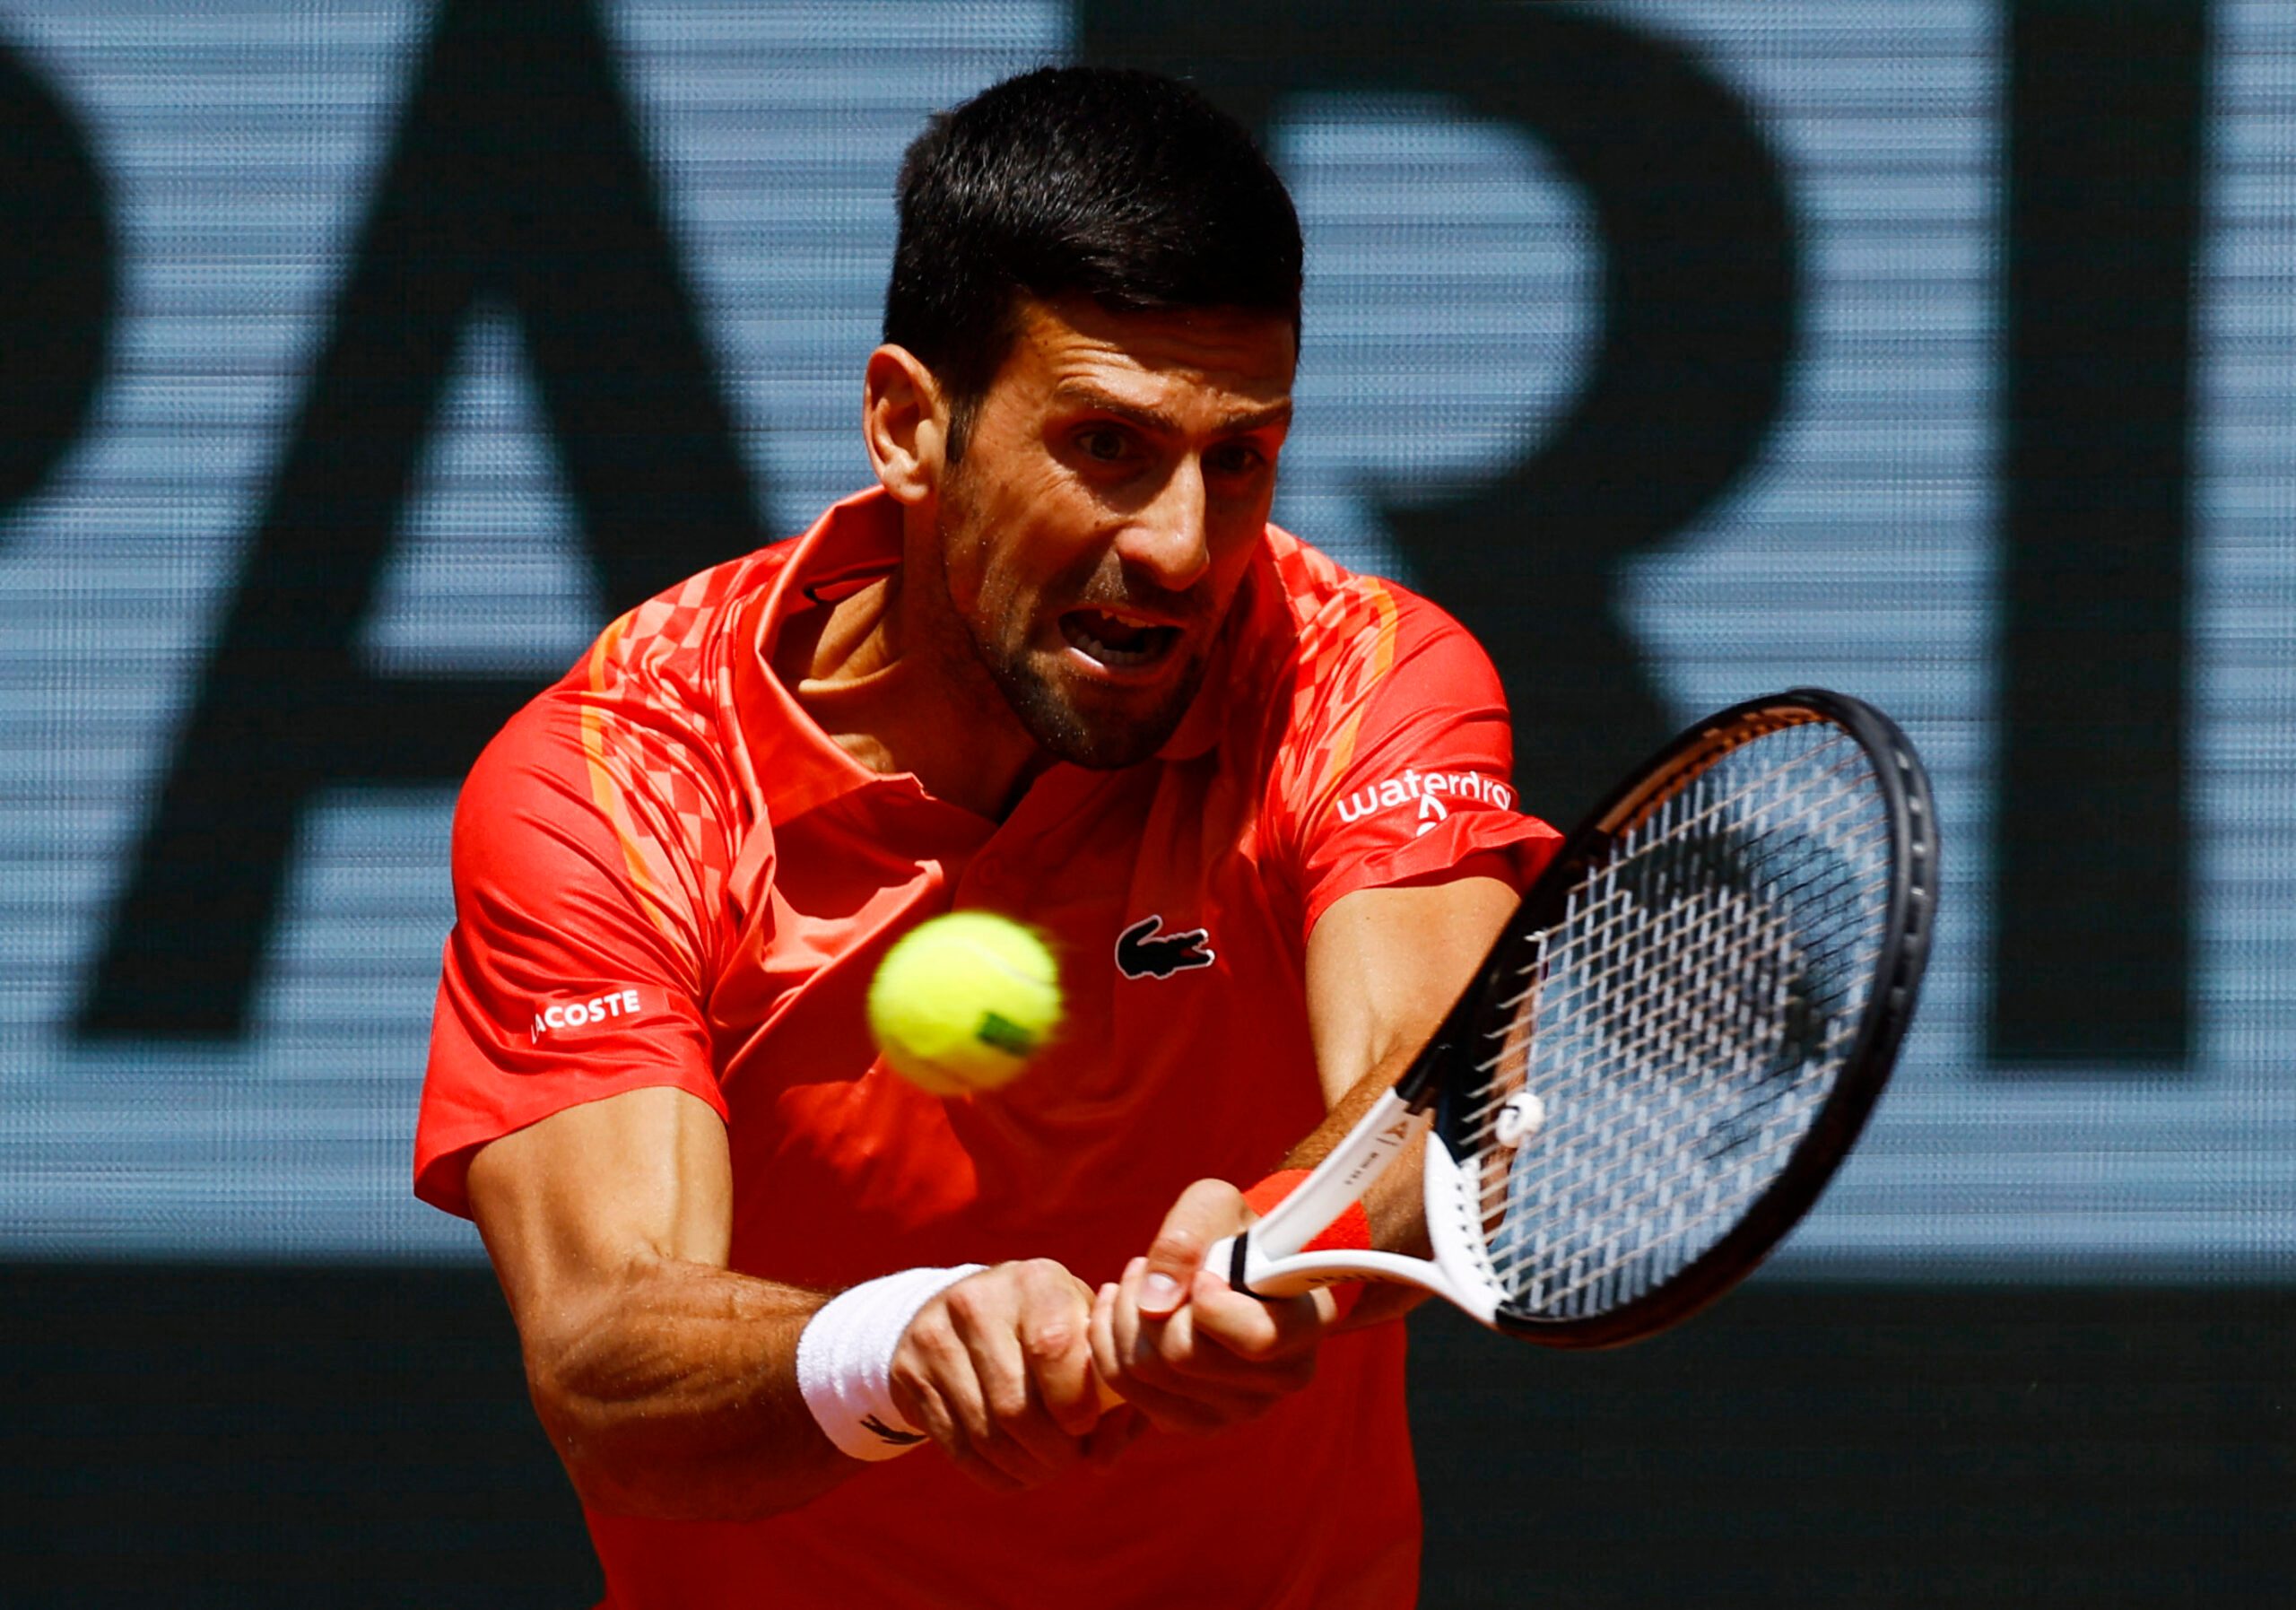 No. 1 Alcaraz crushes French Open opener, Djokovic stirs issue anew in own rout